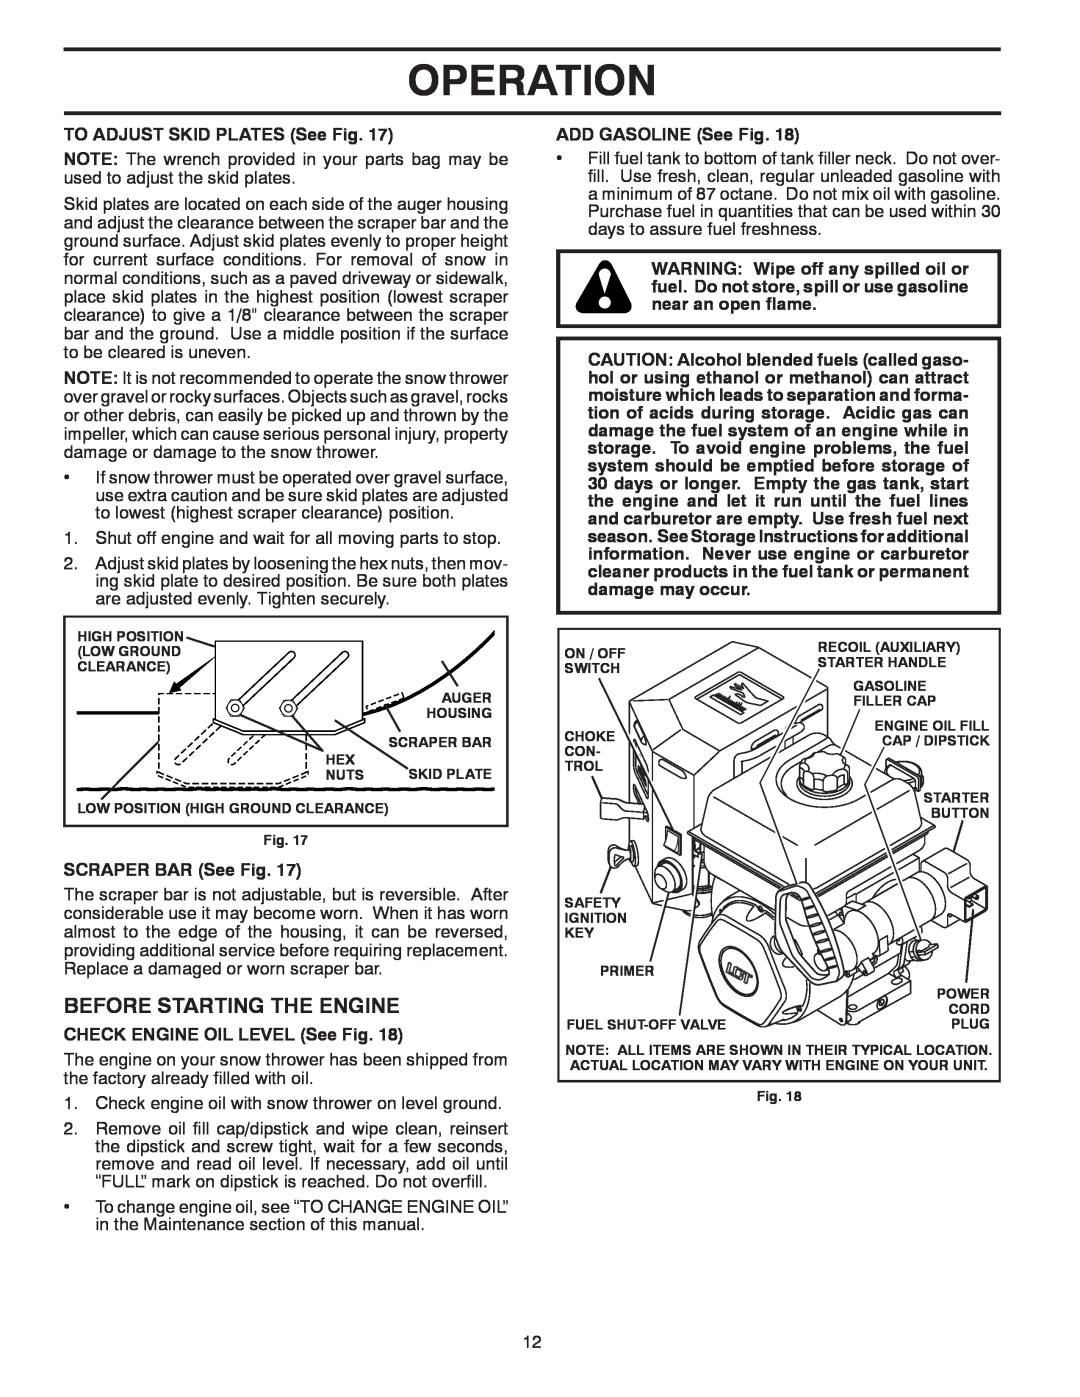 Poulan 437390, 96198003601 Before Starting The Engine, Operation, TO ADJUST SKID PLATES See Fig, SCRAPER BAR See Fig 